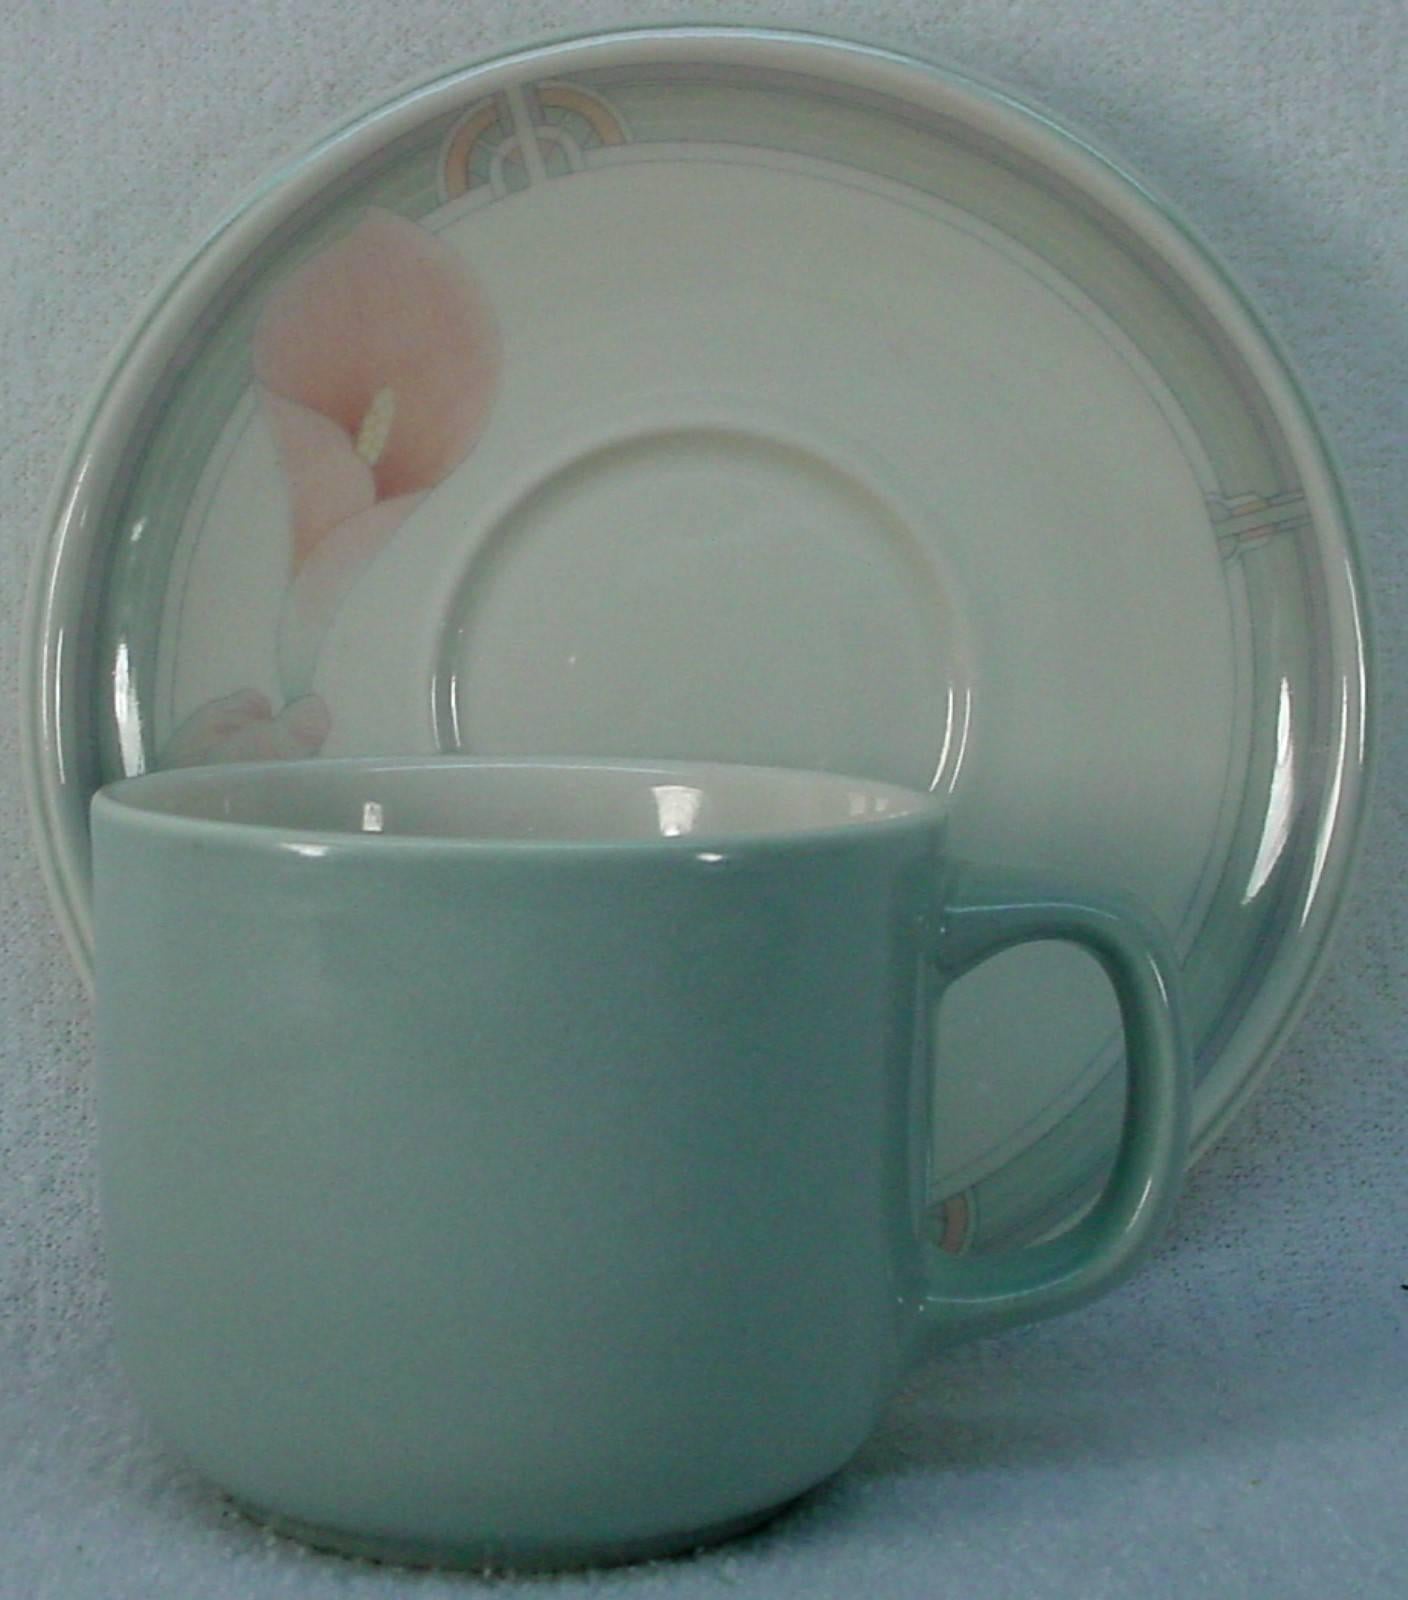 Noritake china Eternal Blush 9138 pattern 48-piece set service for 12

in great condition free from chips, cracks, breaks or stains. Some items show minor wear.

Keltcraft Misty Isle. 

Includes 12 cups, 12 saucers, 12 dinner plates and 12